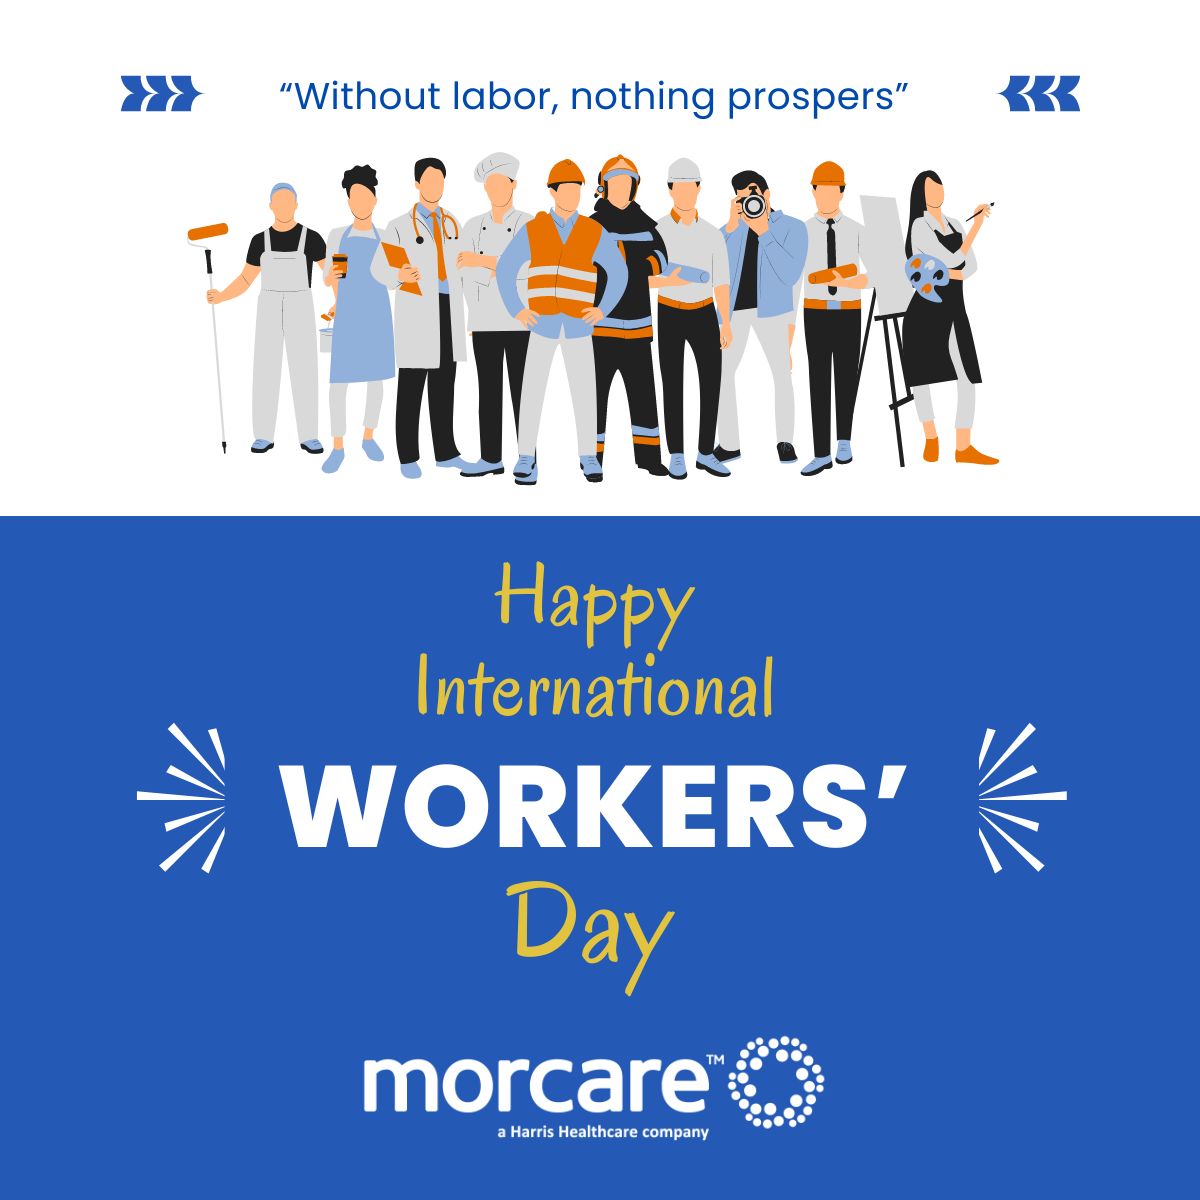 Today, we celebrate the dedication and hard work of every professional around the world. Happy International Workers' Day to everyone contributing their skills and passion to make a difference! #InternationalWorkersDay #WeAreHarris